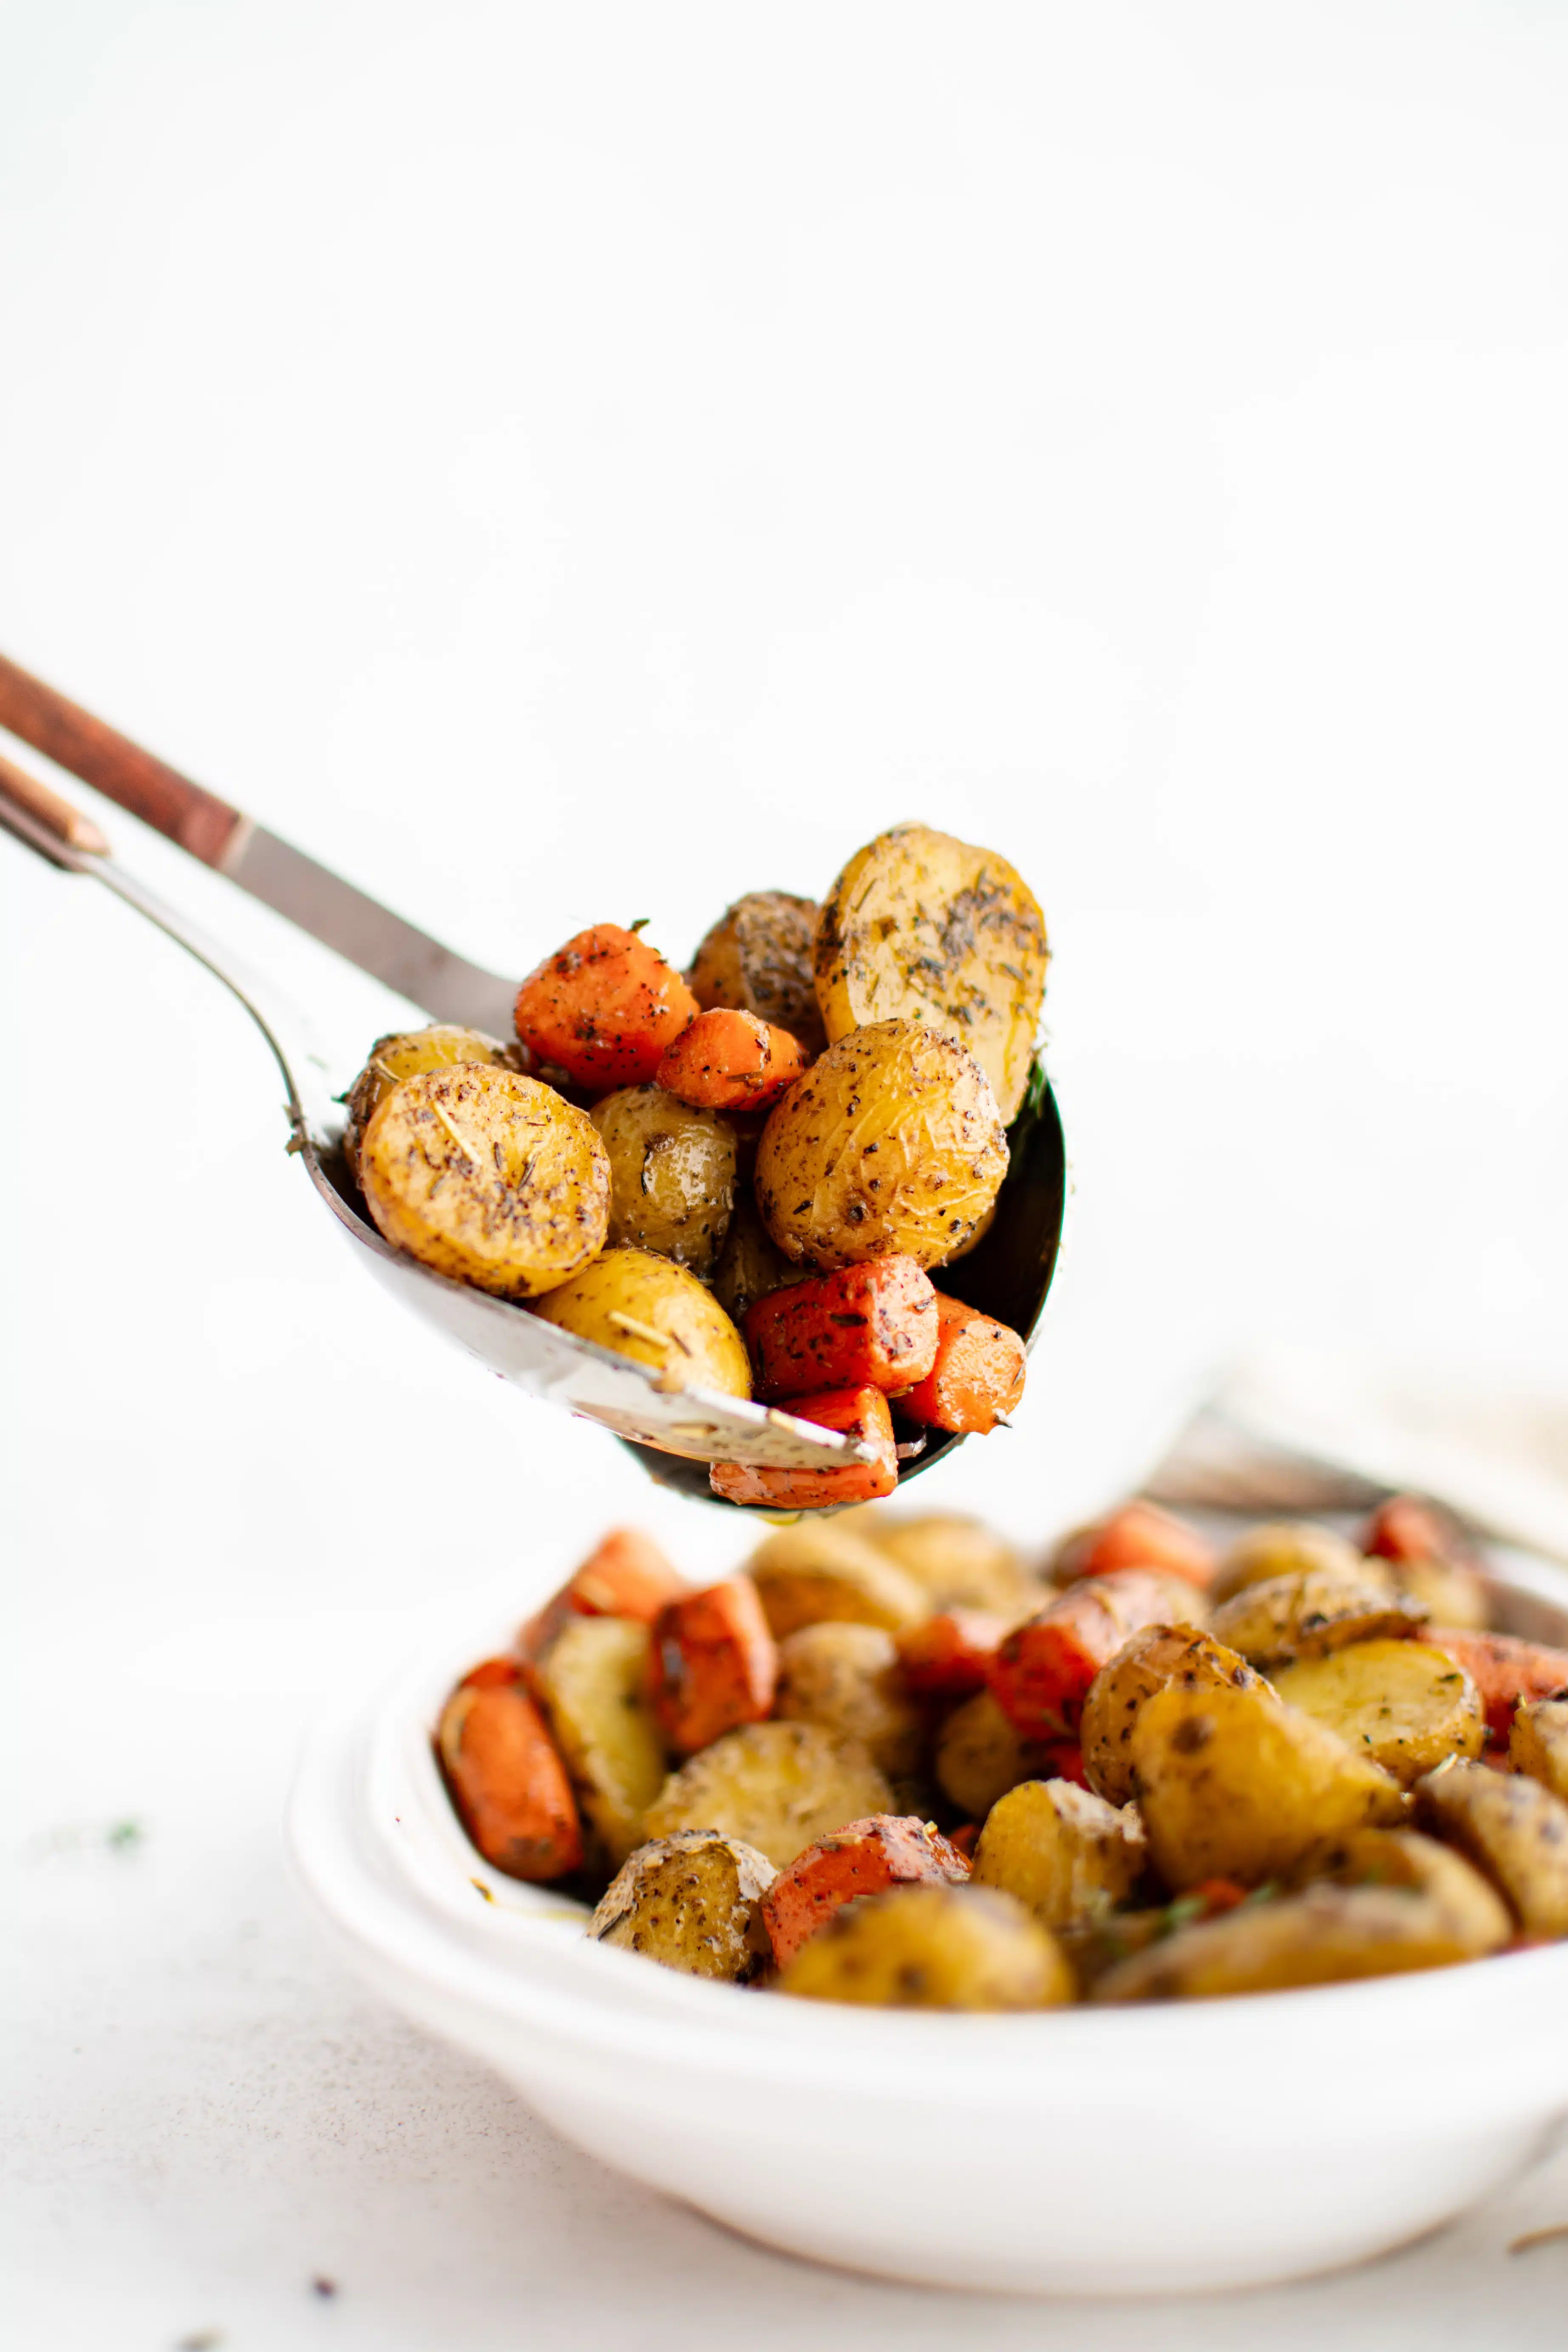 Large serving spoon with a scoop of roasted potatoes and carrots taken from a large white serving dish filled with the remaining roasted veggies.